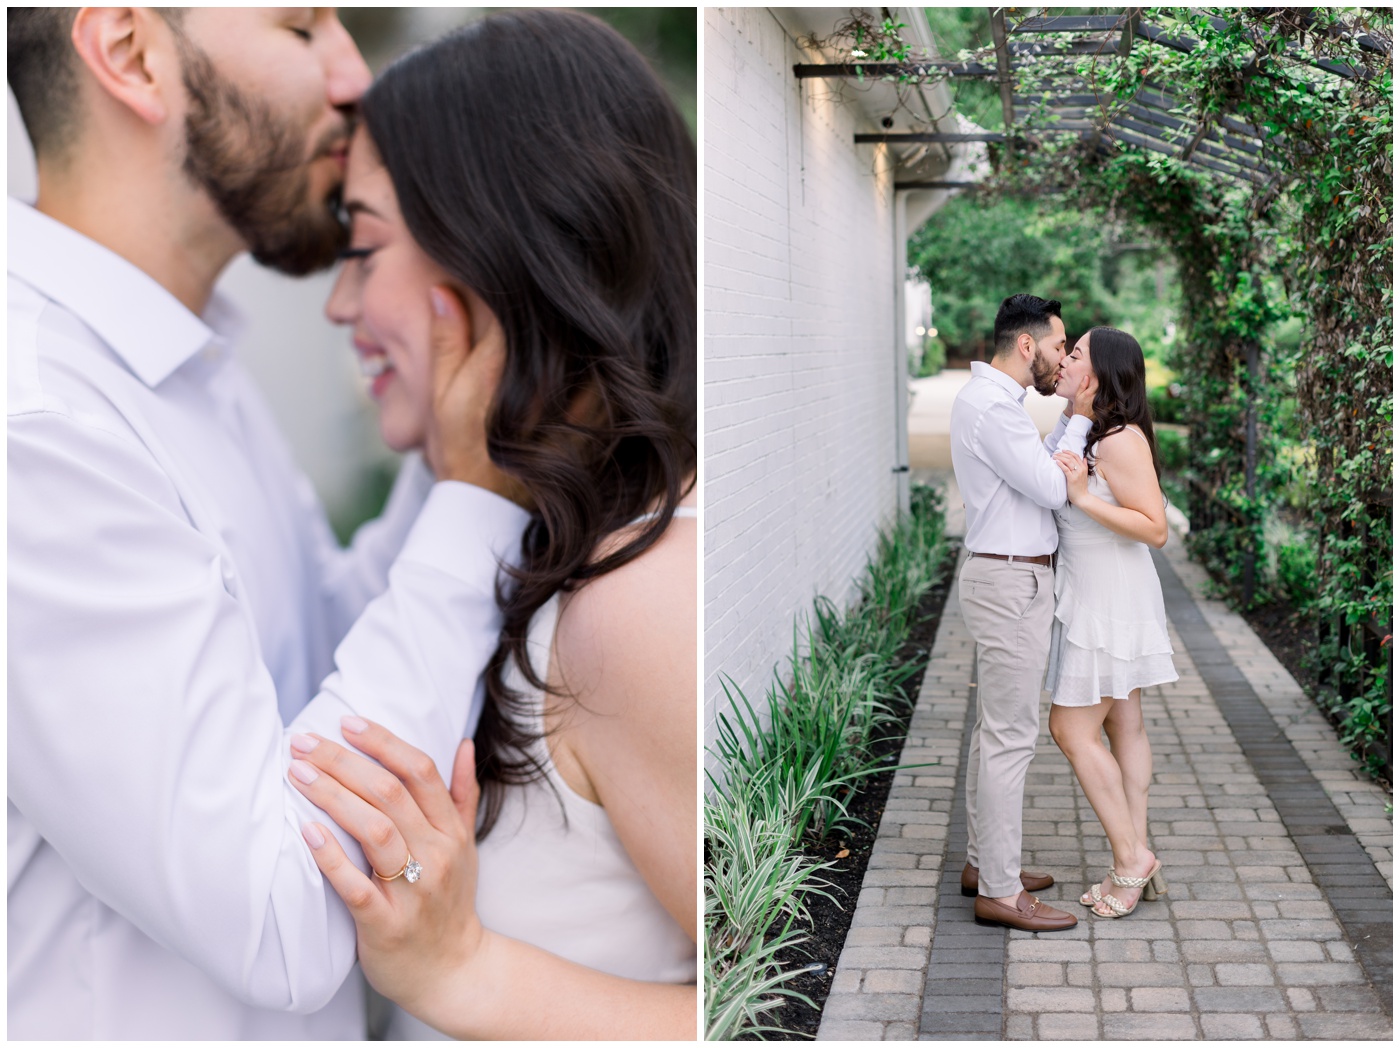 A couple kisses at the Peach Orchard Venue.